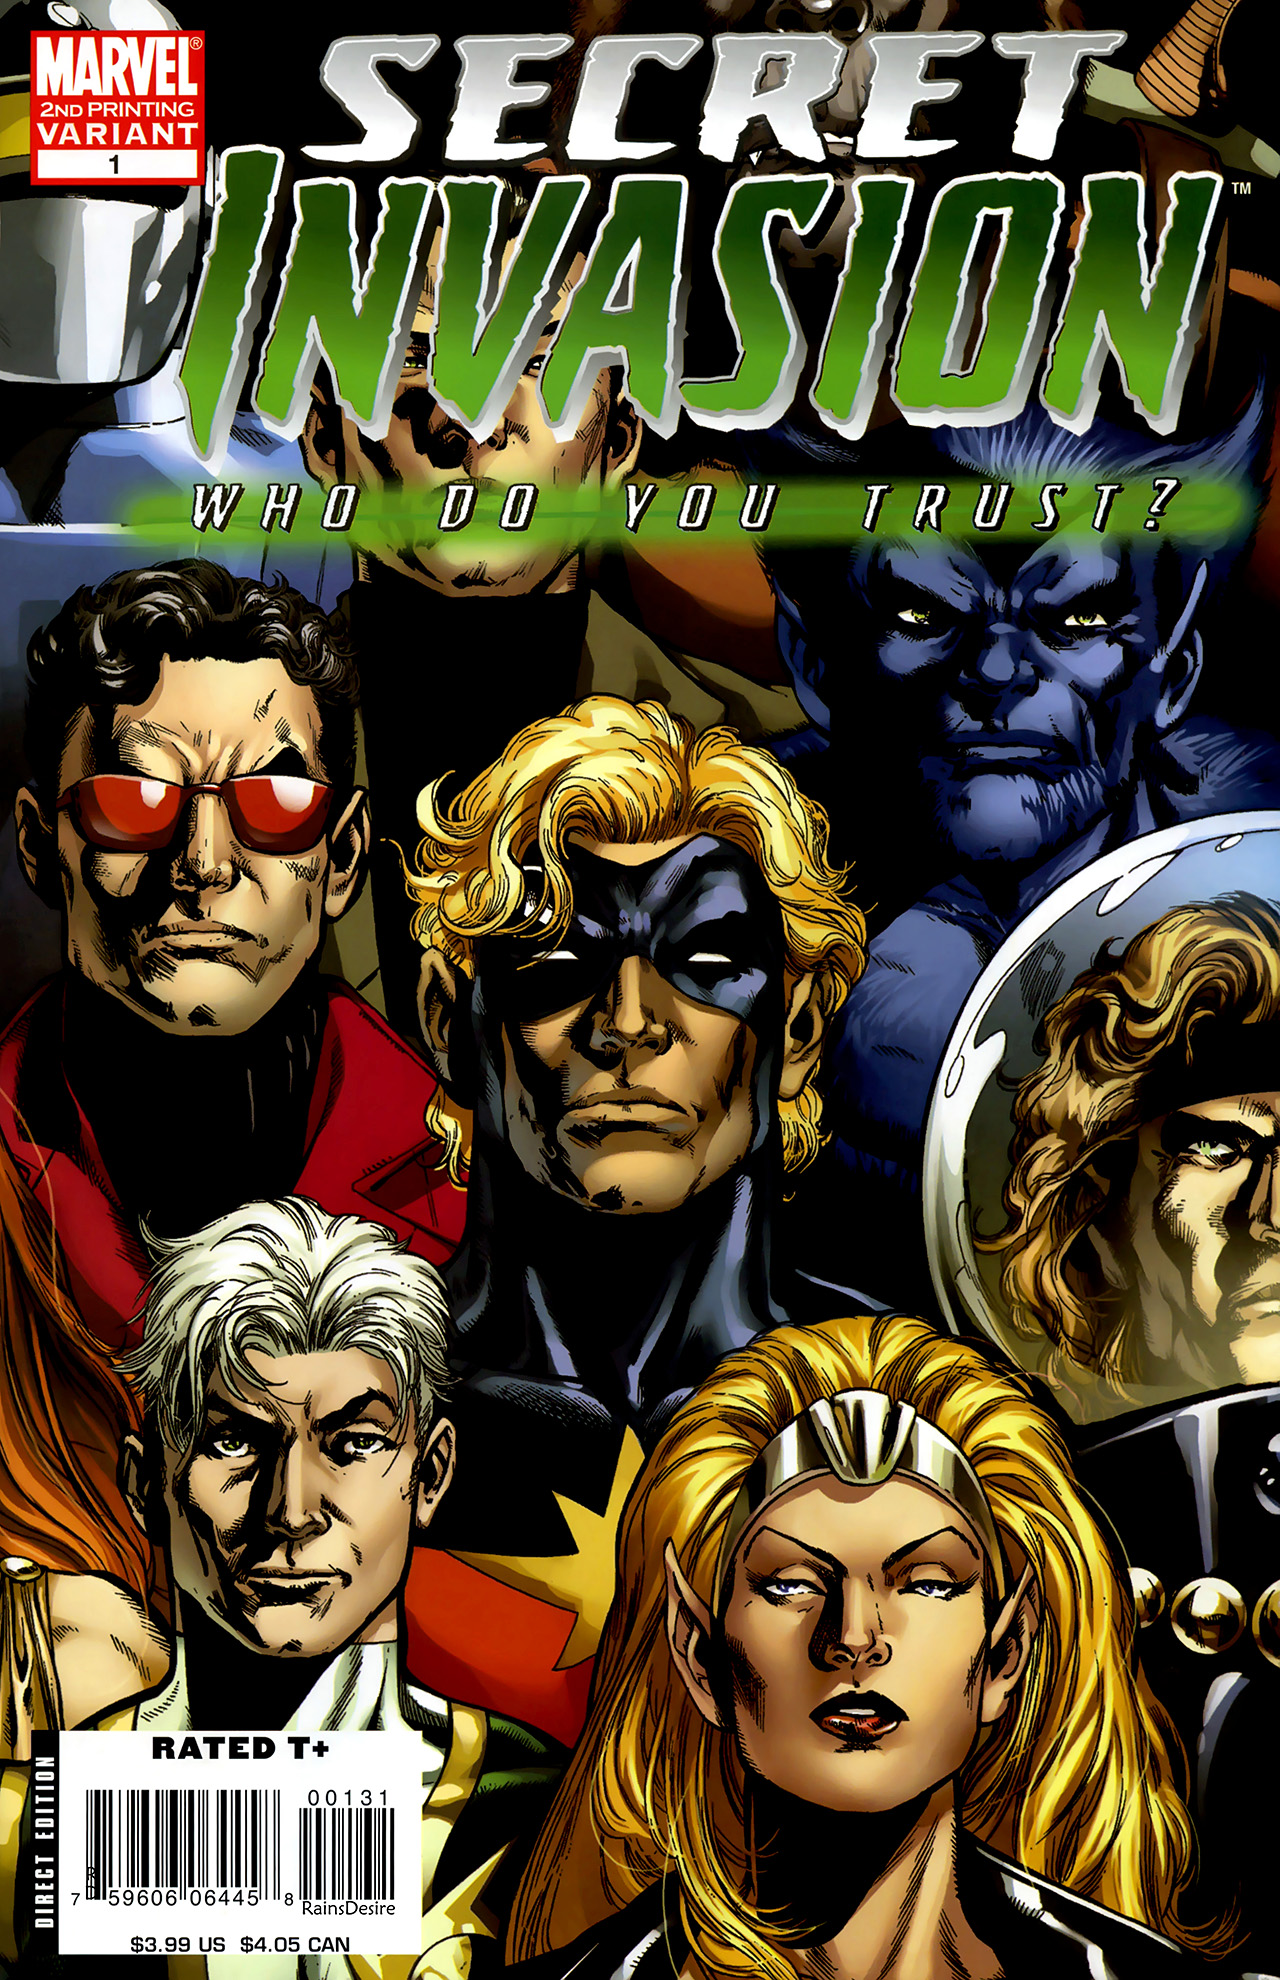 Read online Secret Invasion: Who Do You Trust? comic -  Issue # Full - 3